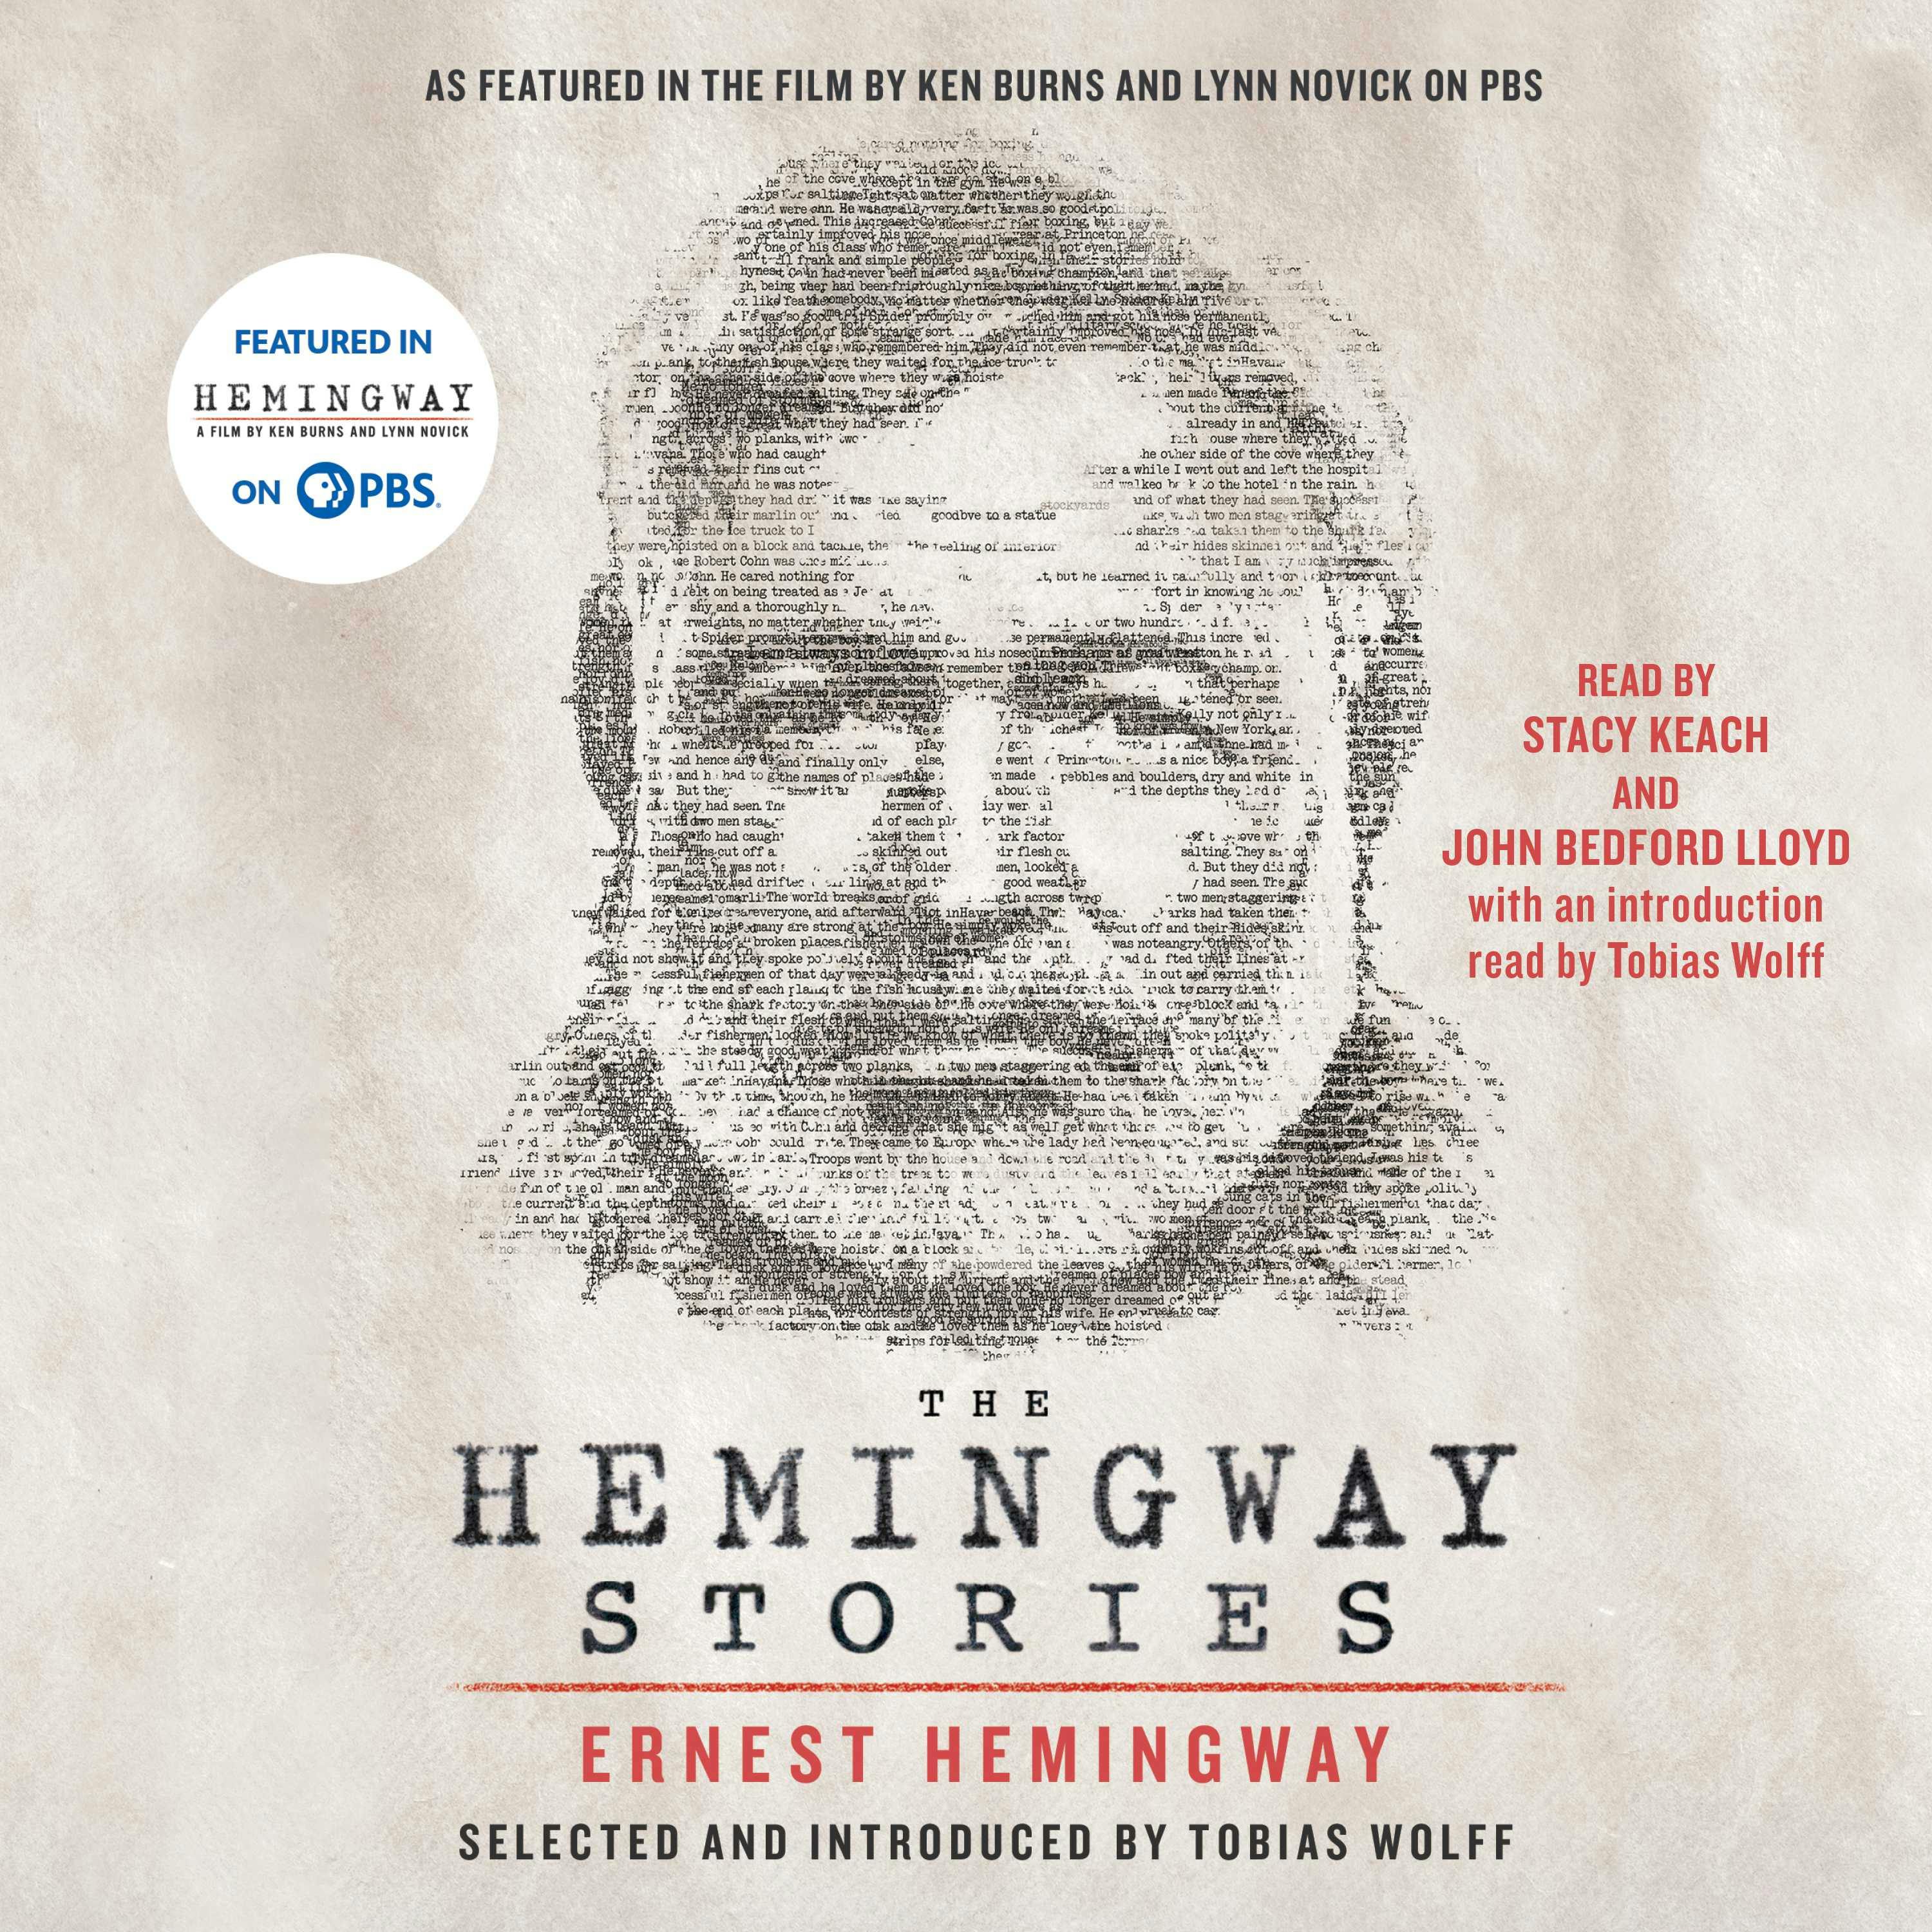 The Hemingway Stories: As featured in the film by Ken Burns and Lynn Novick on PBS - Ernest Hemingway